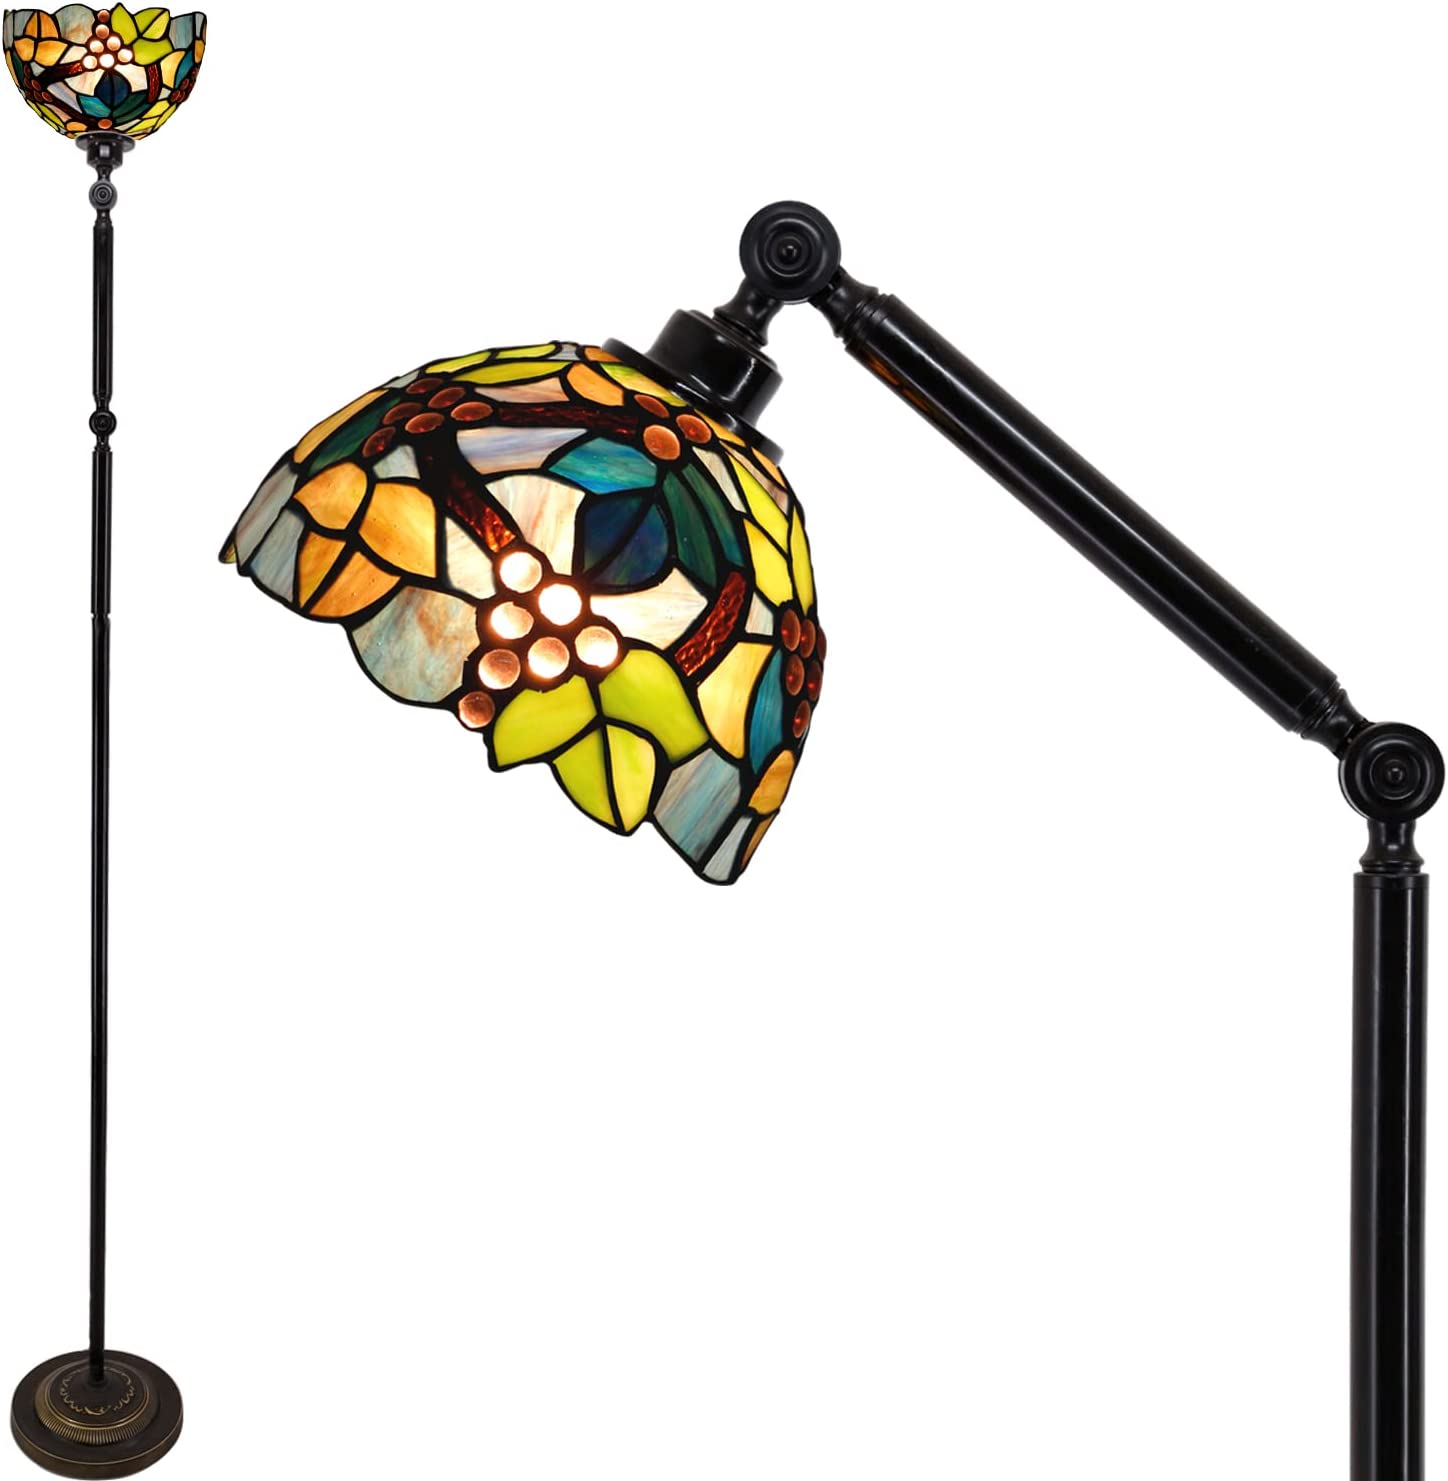 Werfactory® Torchiere Tiffany Floor Lamp Stained Glass Grape Arched Gooseneck Reading Light